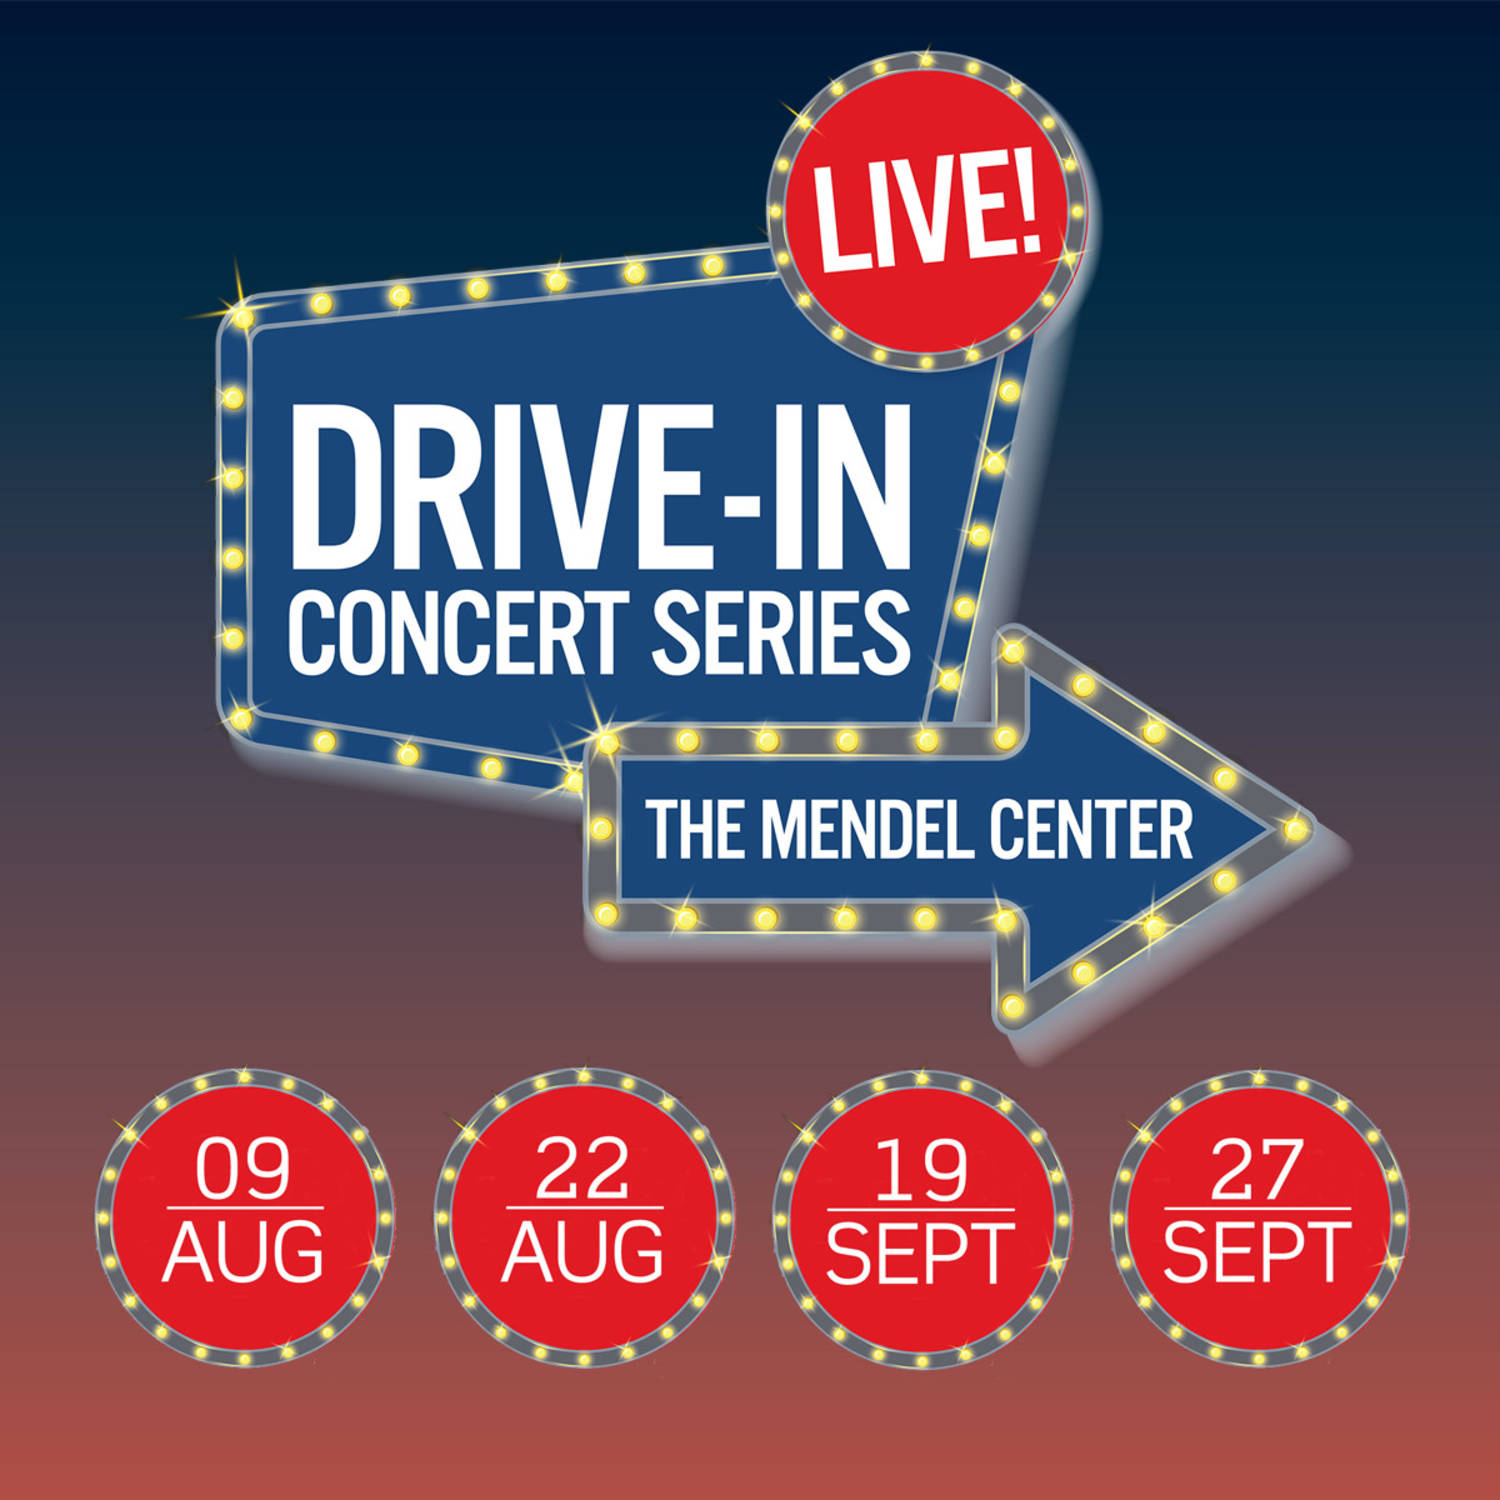 The Mendel Center announces new Drive-in Live! Concert Series